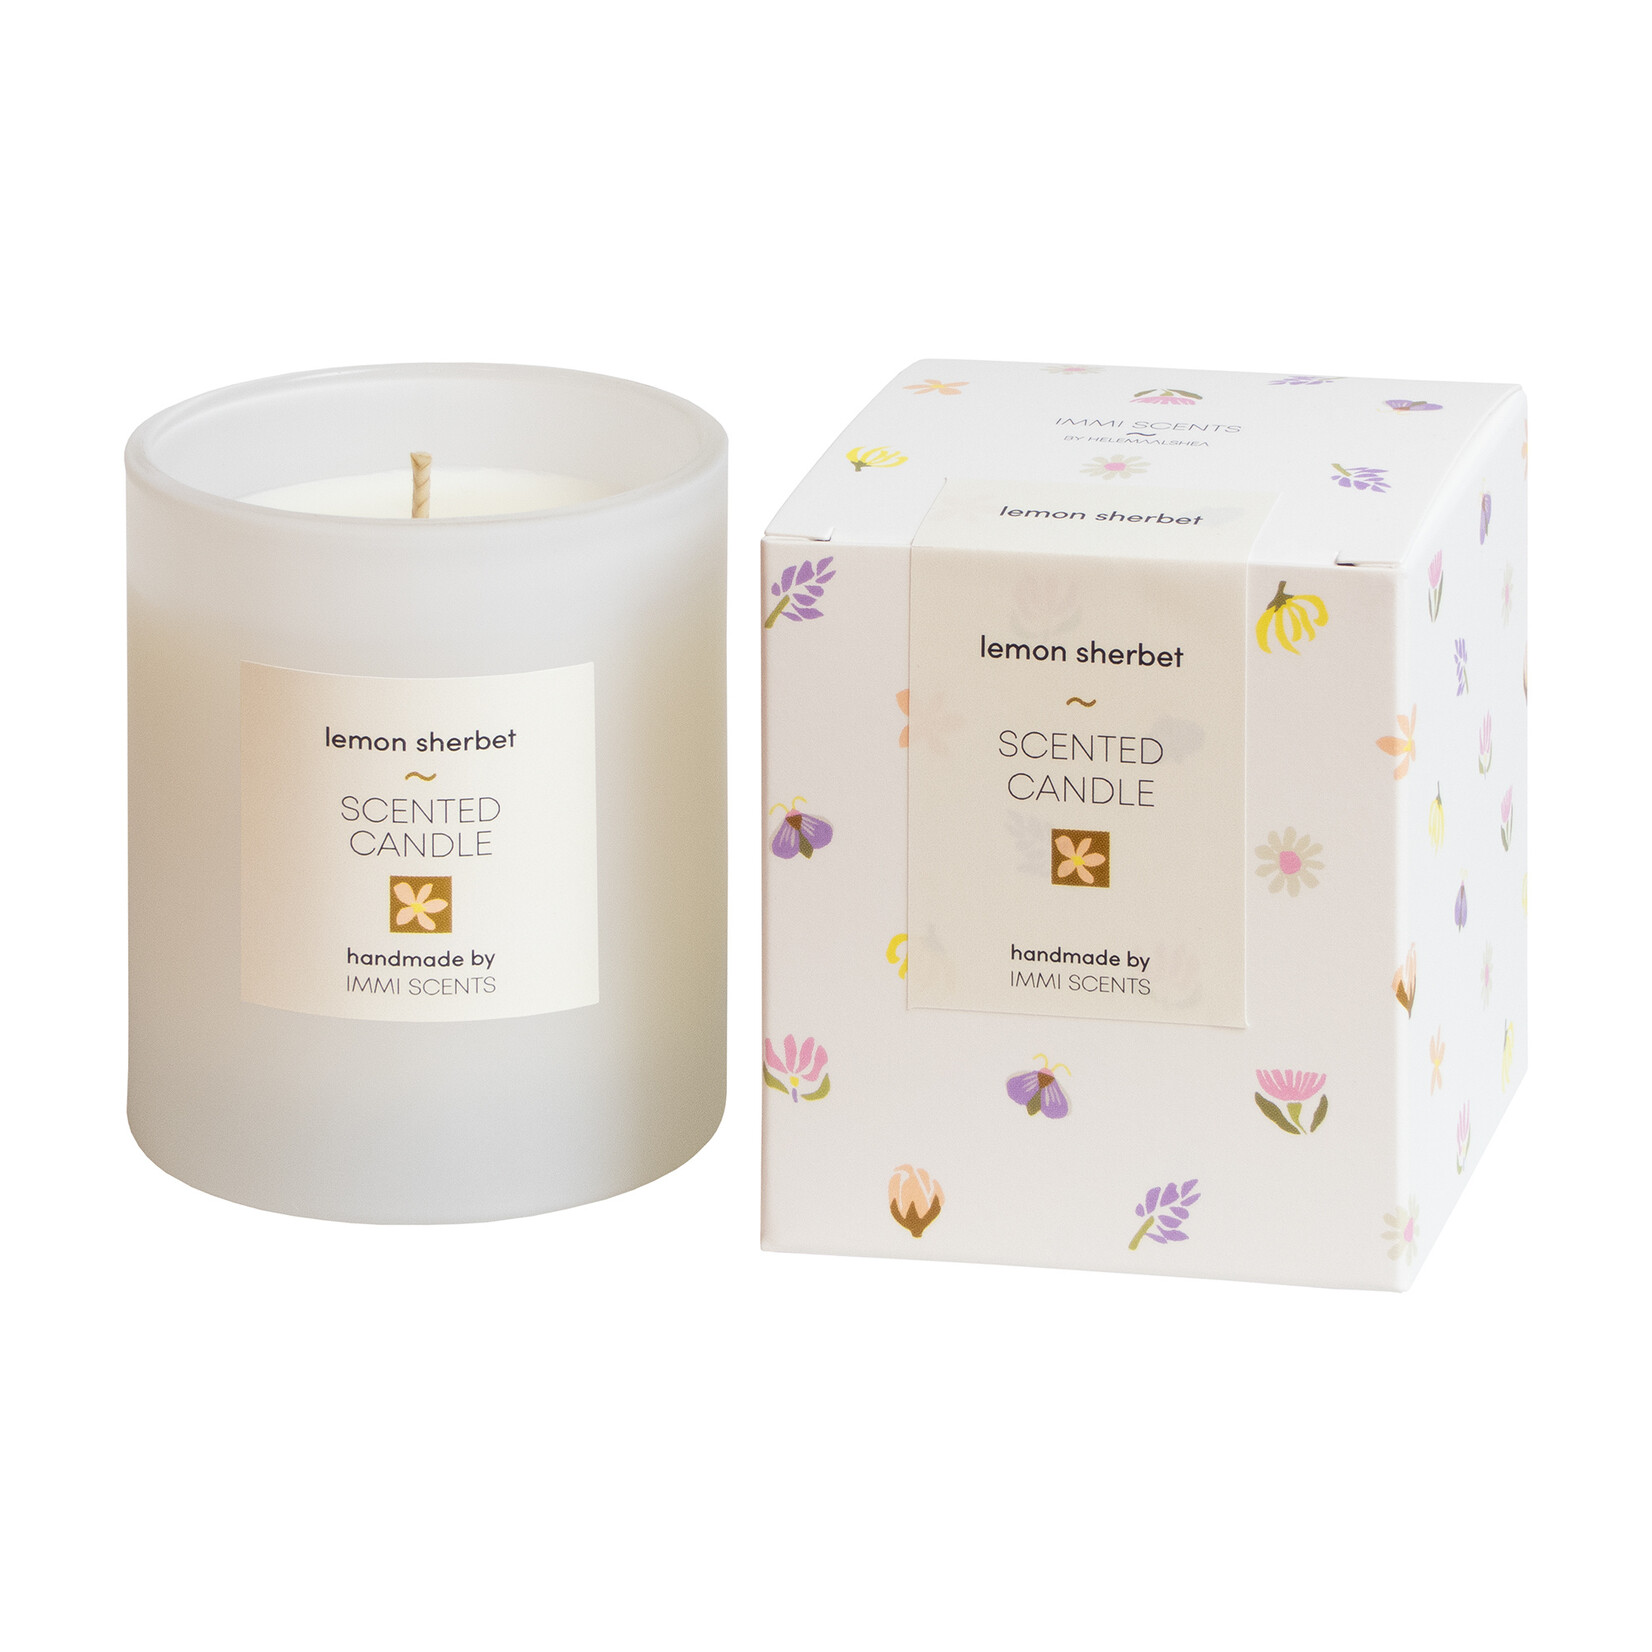 Scented candle - Lemon Sherbet - white